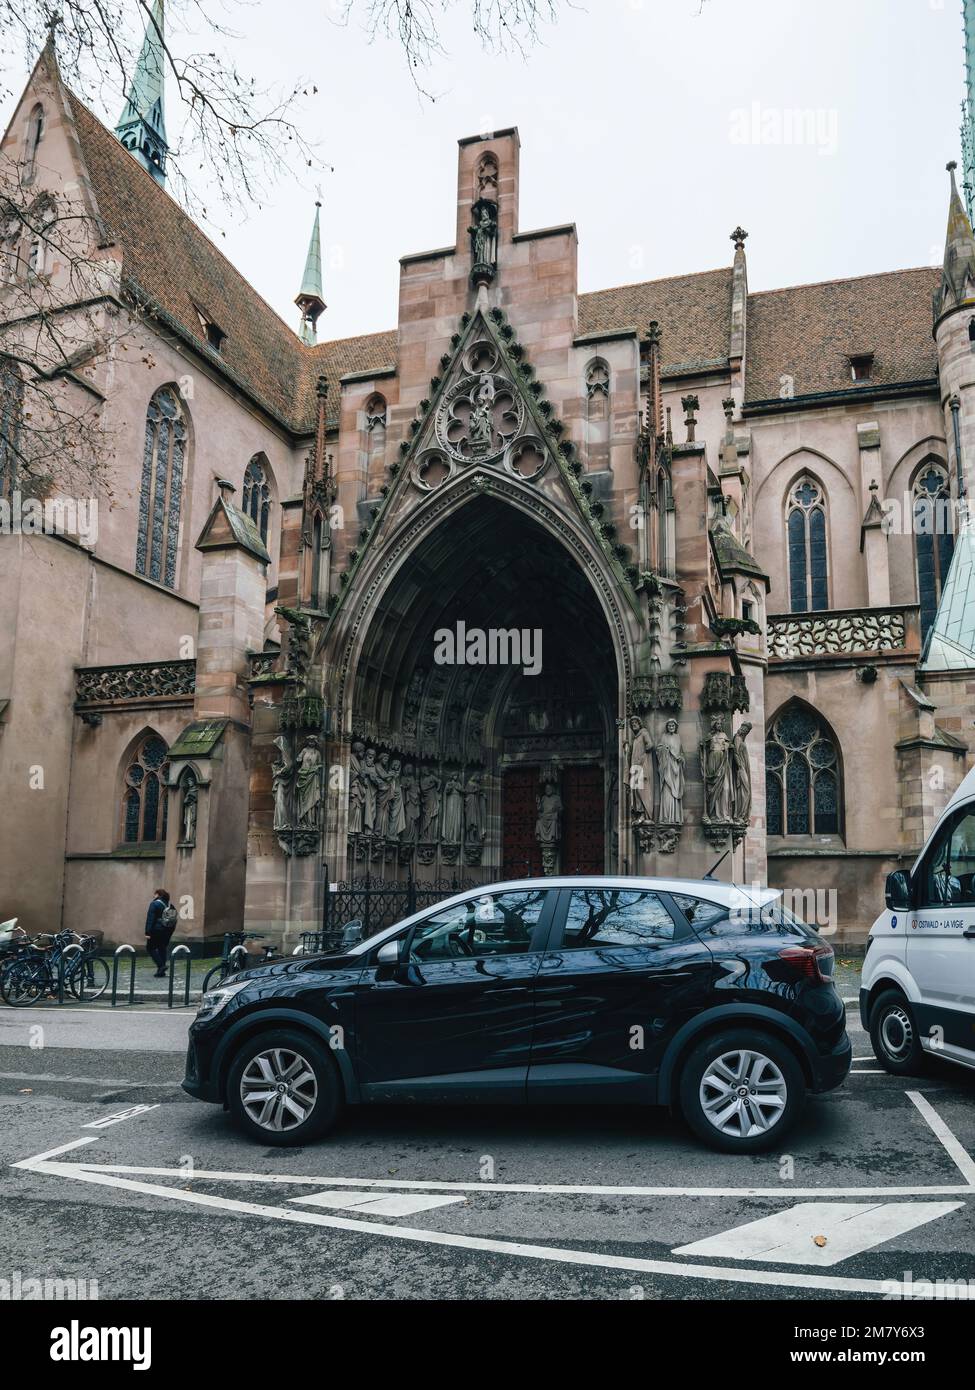 Strasbourg, France - Jan 5 2023: Renault car parked in front of Eglise Saint-Pierre-le-Jeune Protestant church in central Strasbourg Stock Photo